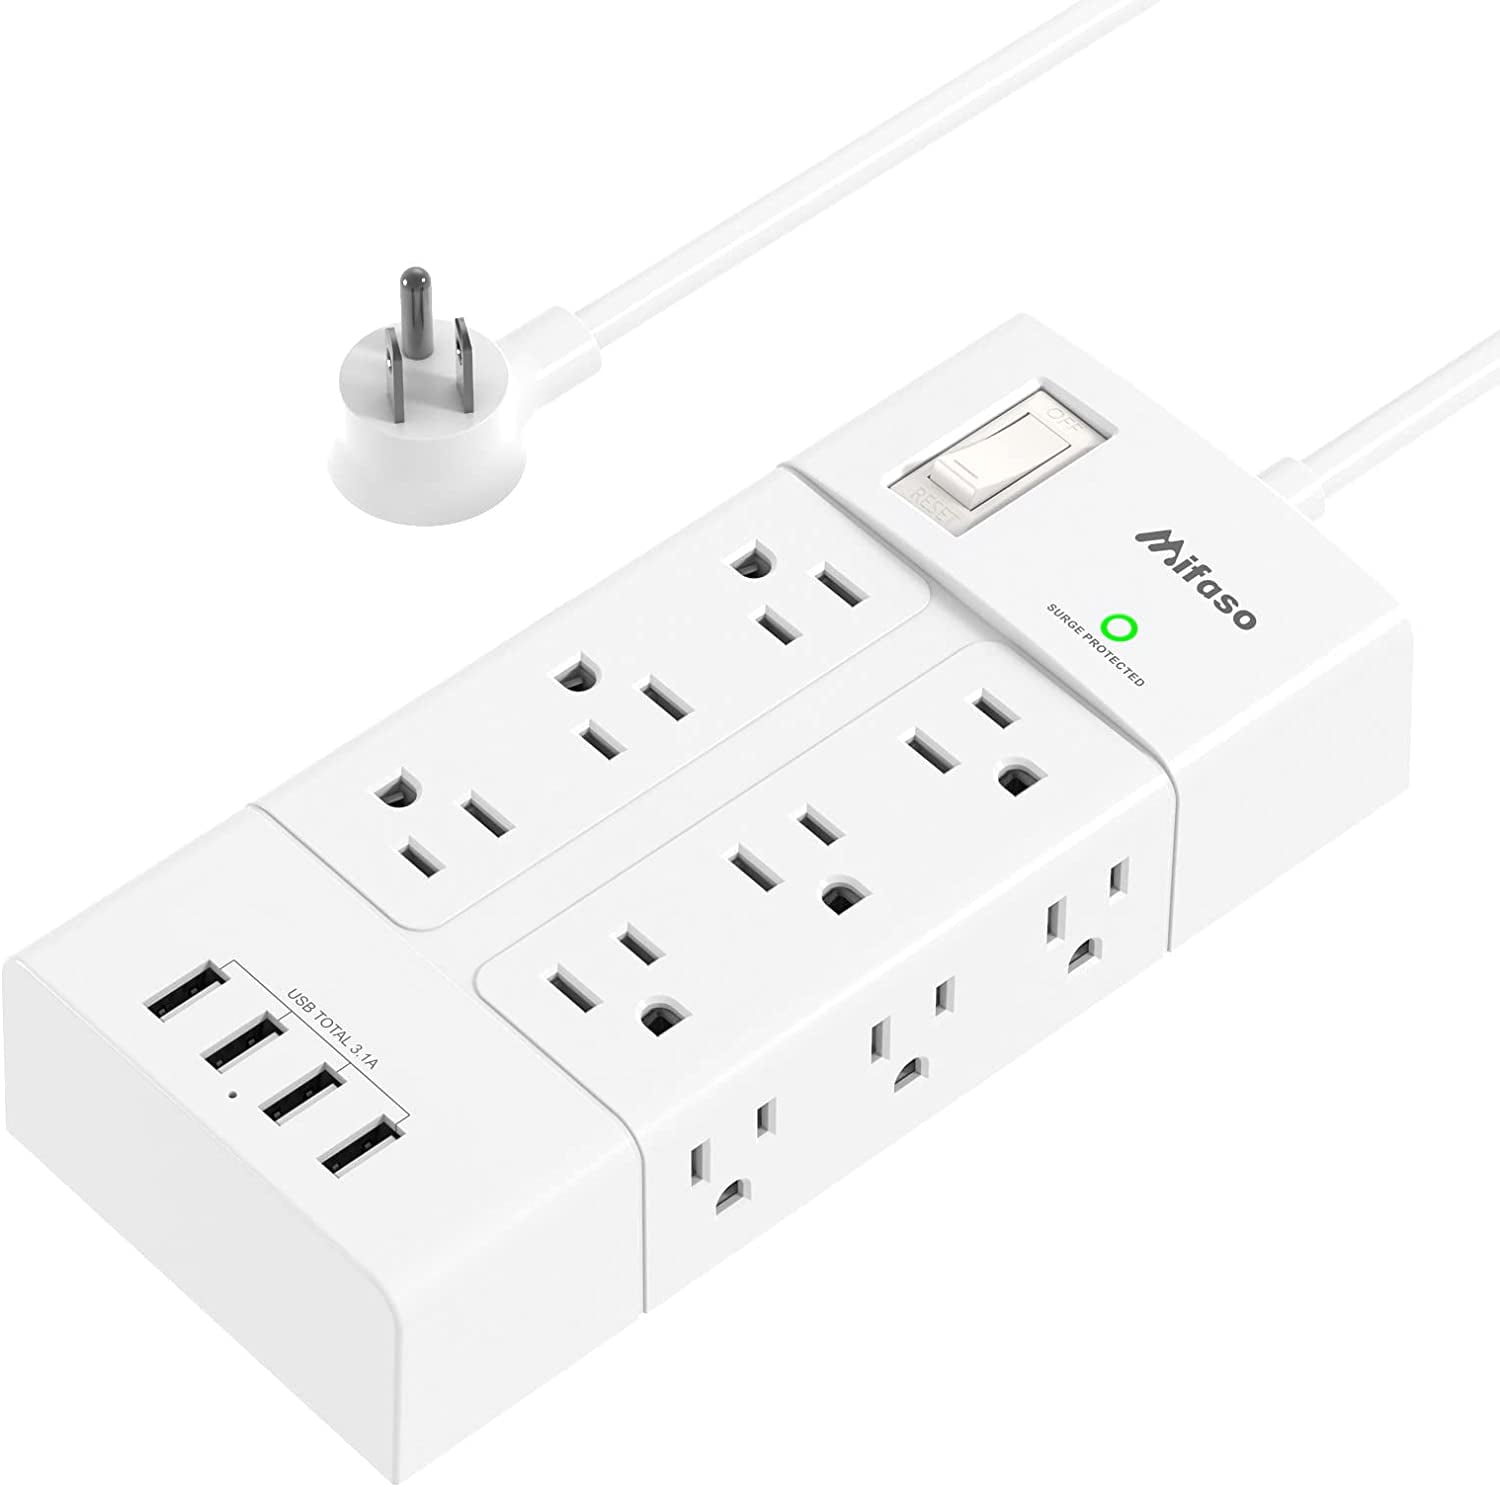 5V/3.1A KEPLUG 5 Outlets and 4 USB Ports Overload Protection 5 ft Cube Extension Cord Flat Plug Wall Mount Power Strip with USB Compact Small Outlet Strip for Home Office Dorm Room Travel 